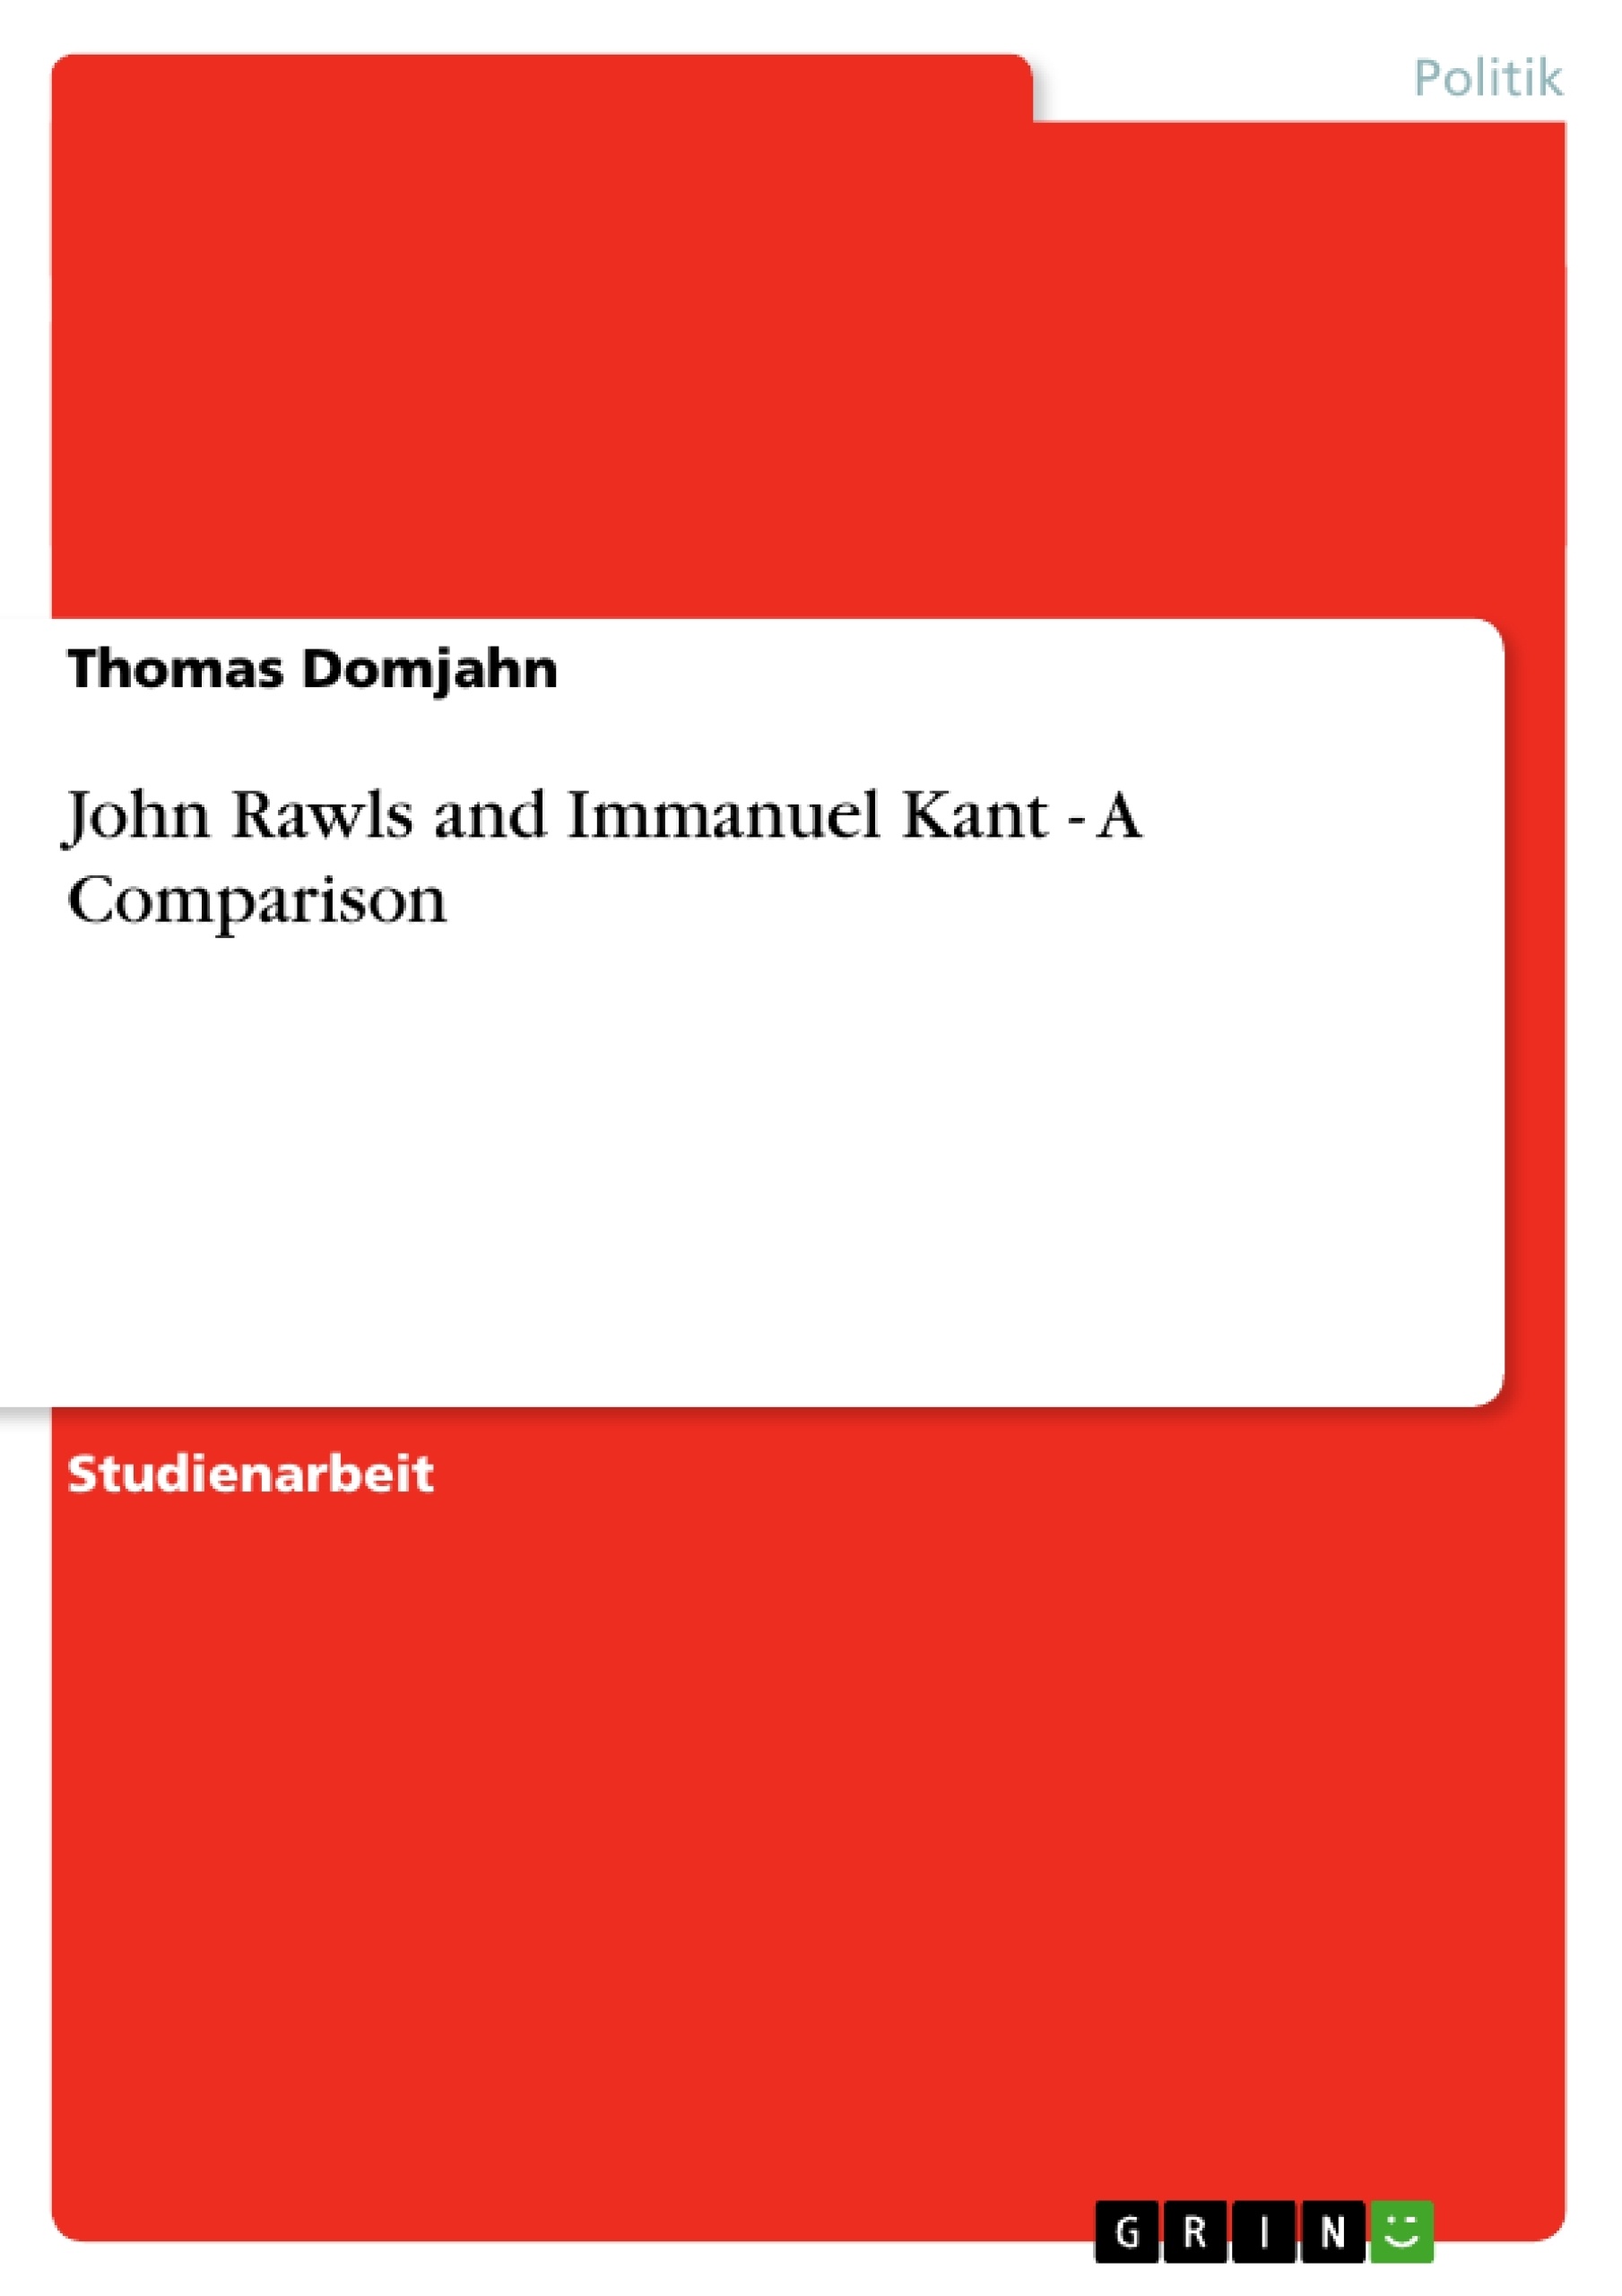 Thesis on immanuel kant